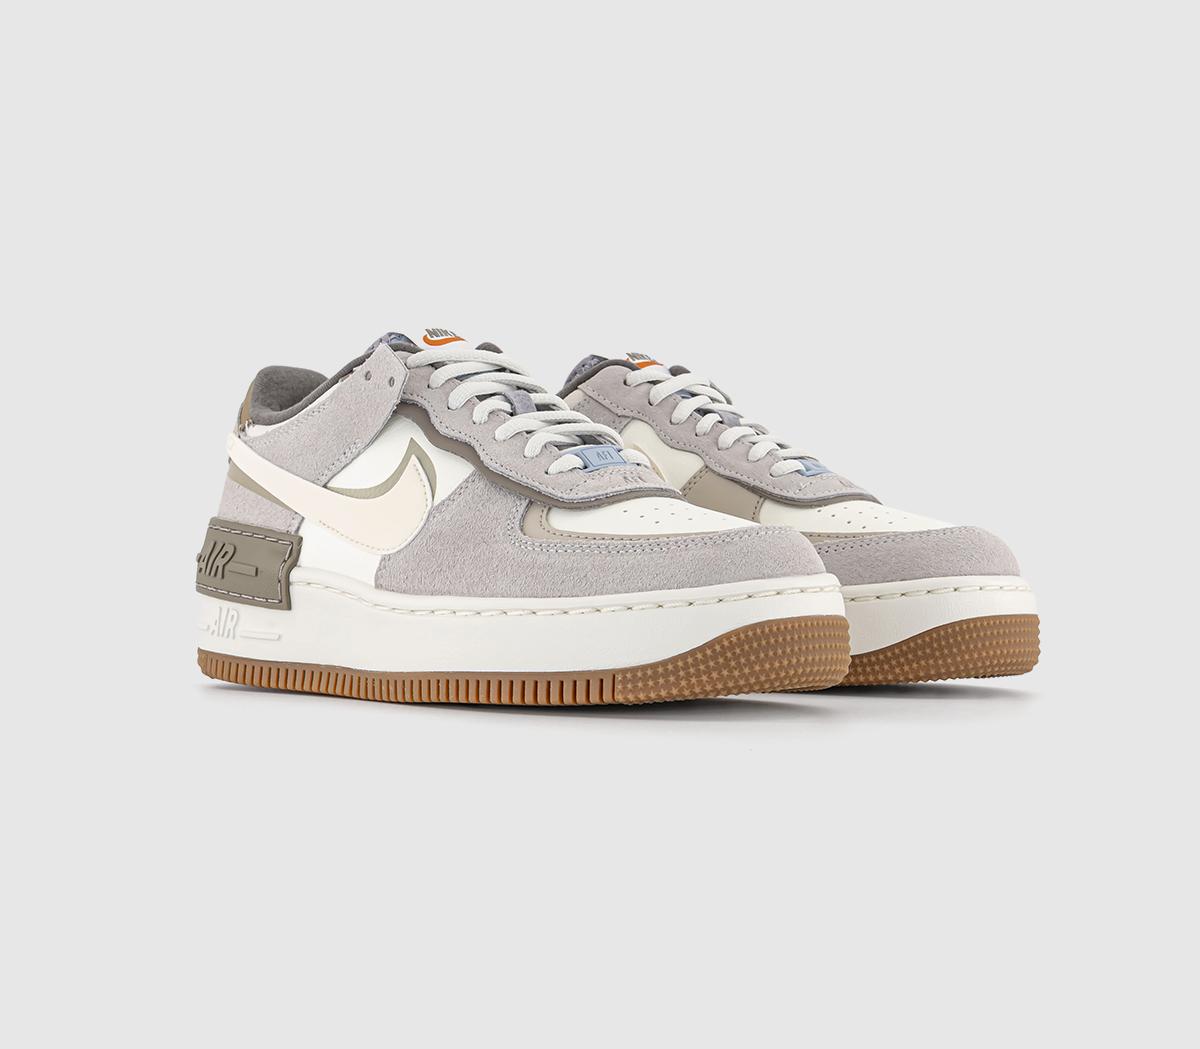 Nike Air Force 1 Shadow Trainers Sail Pale Ivory Grey Fog Provence Purple Cave White, 7.5